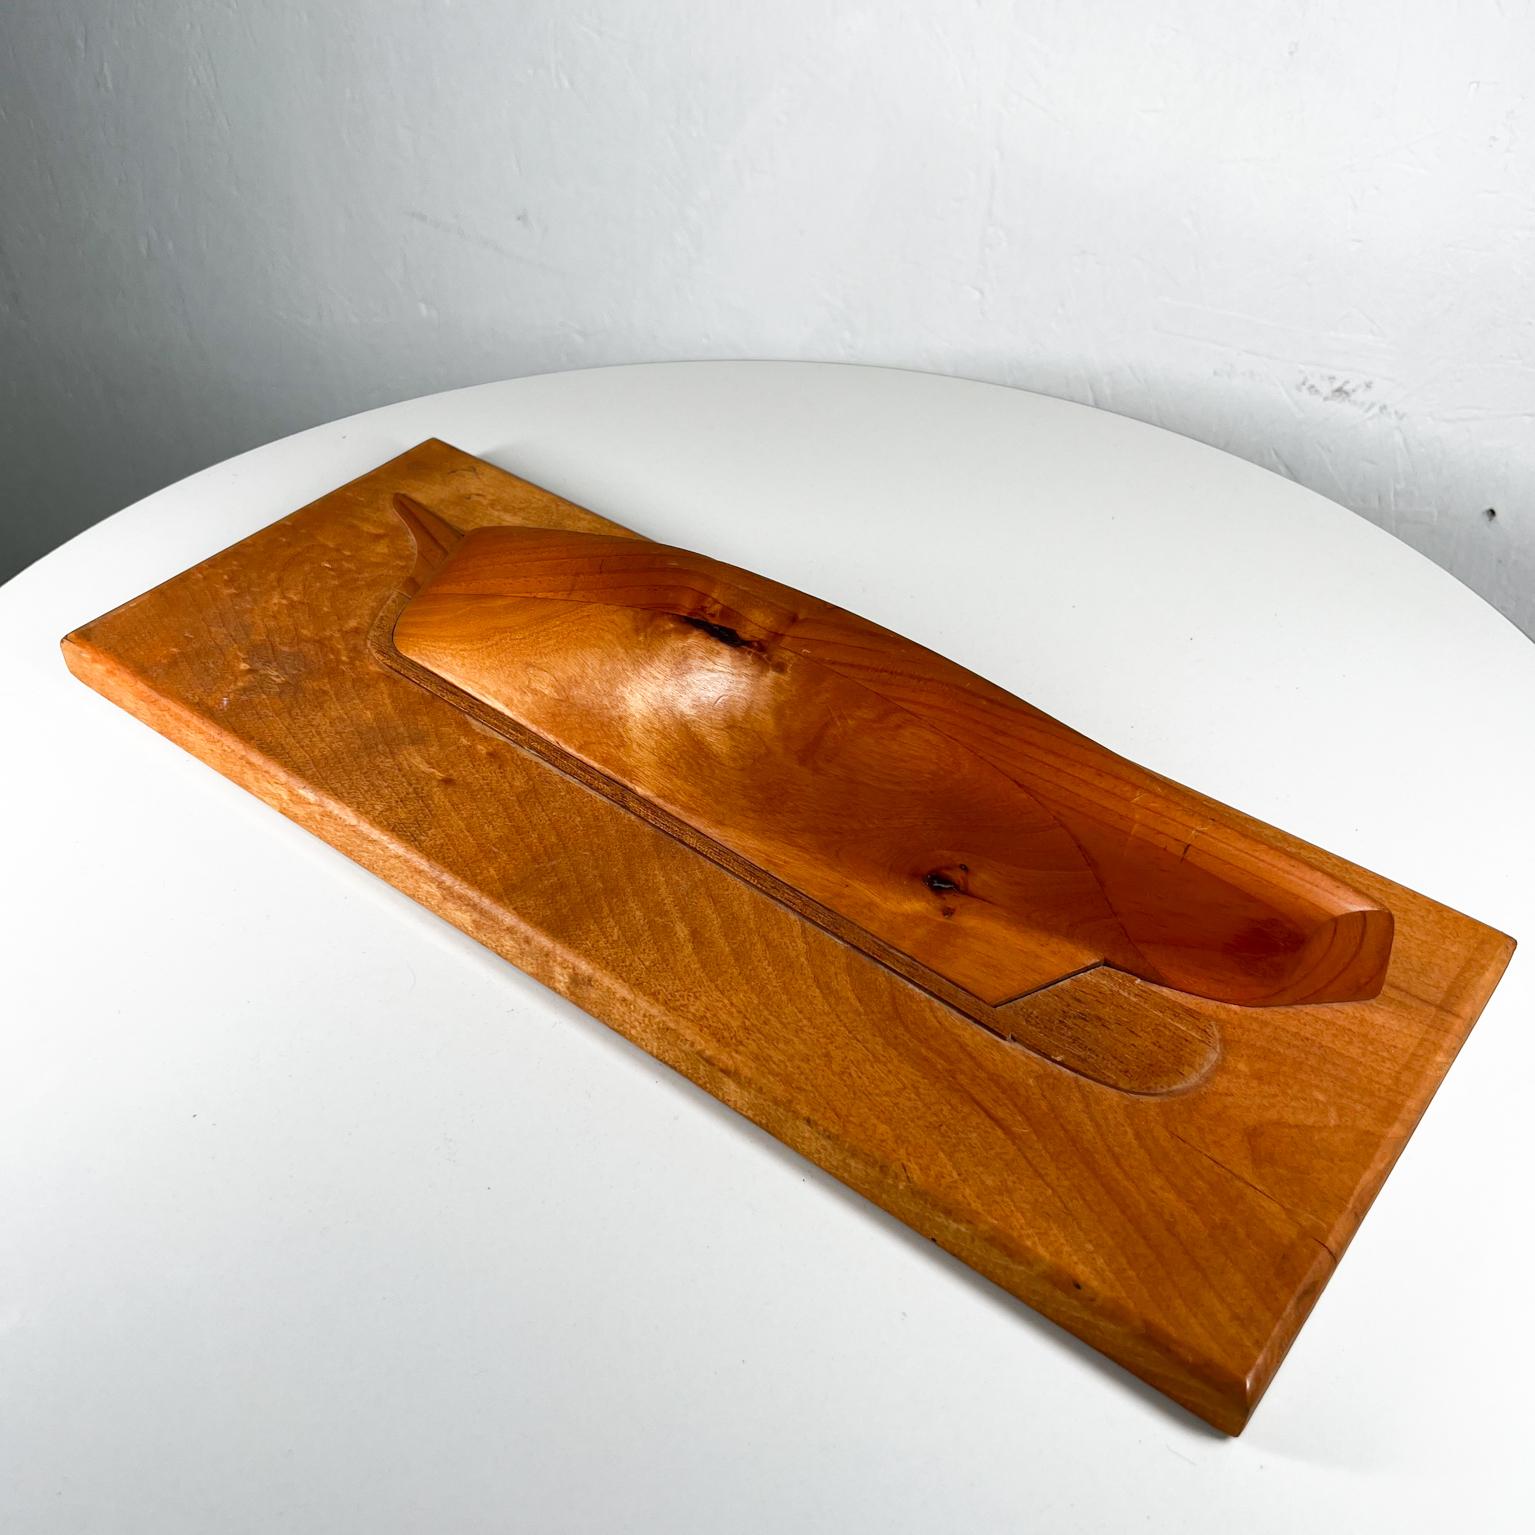 1980s Modernist Art Exotic Wood Boat Sculpture
Artisan custom made boat art in exotic woods (looks like solid maple),
No stamp present.
Trivia- Trump has one similar seen on the wall in his Trump Tower office.
17.25 w x 6.63 tall x 3 d
Original